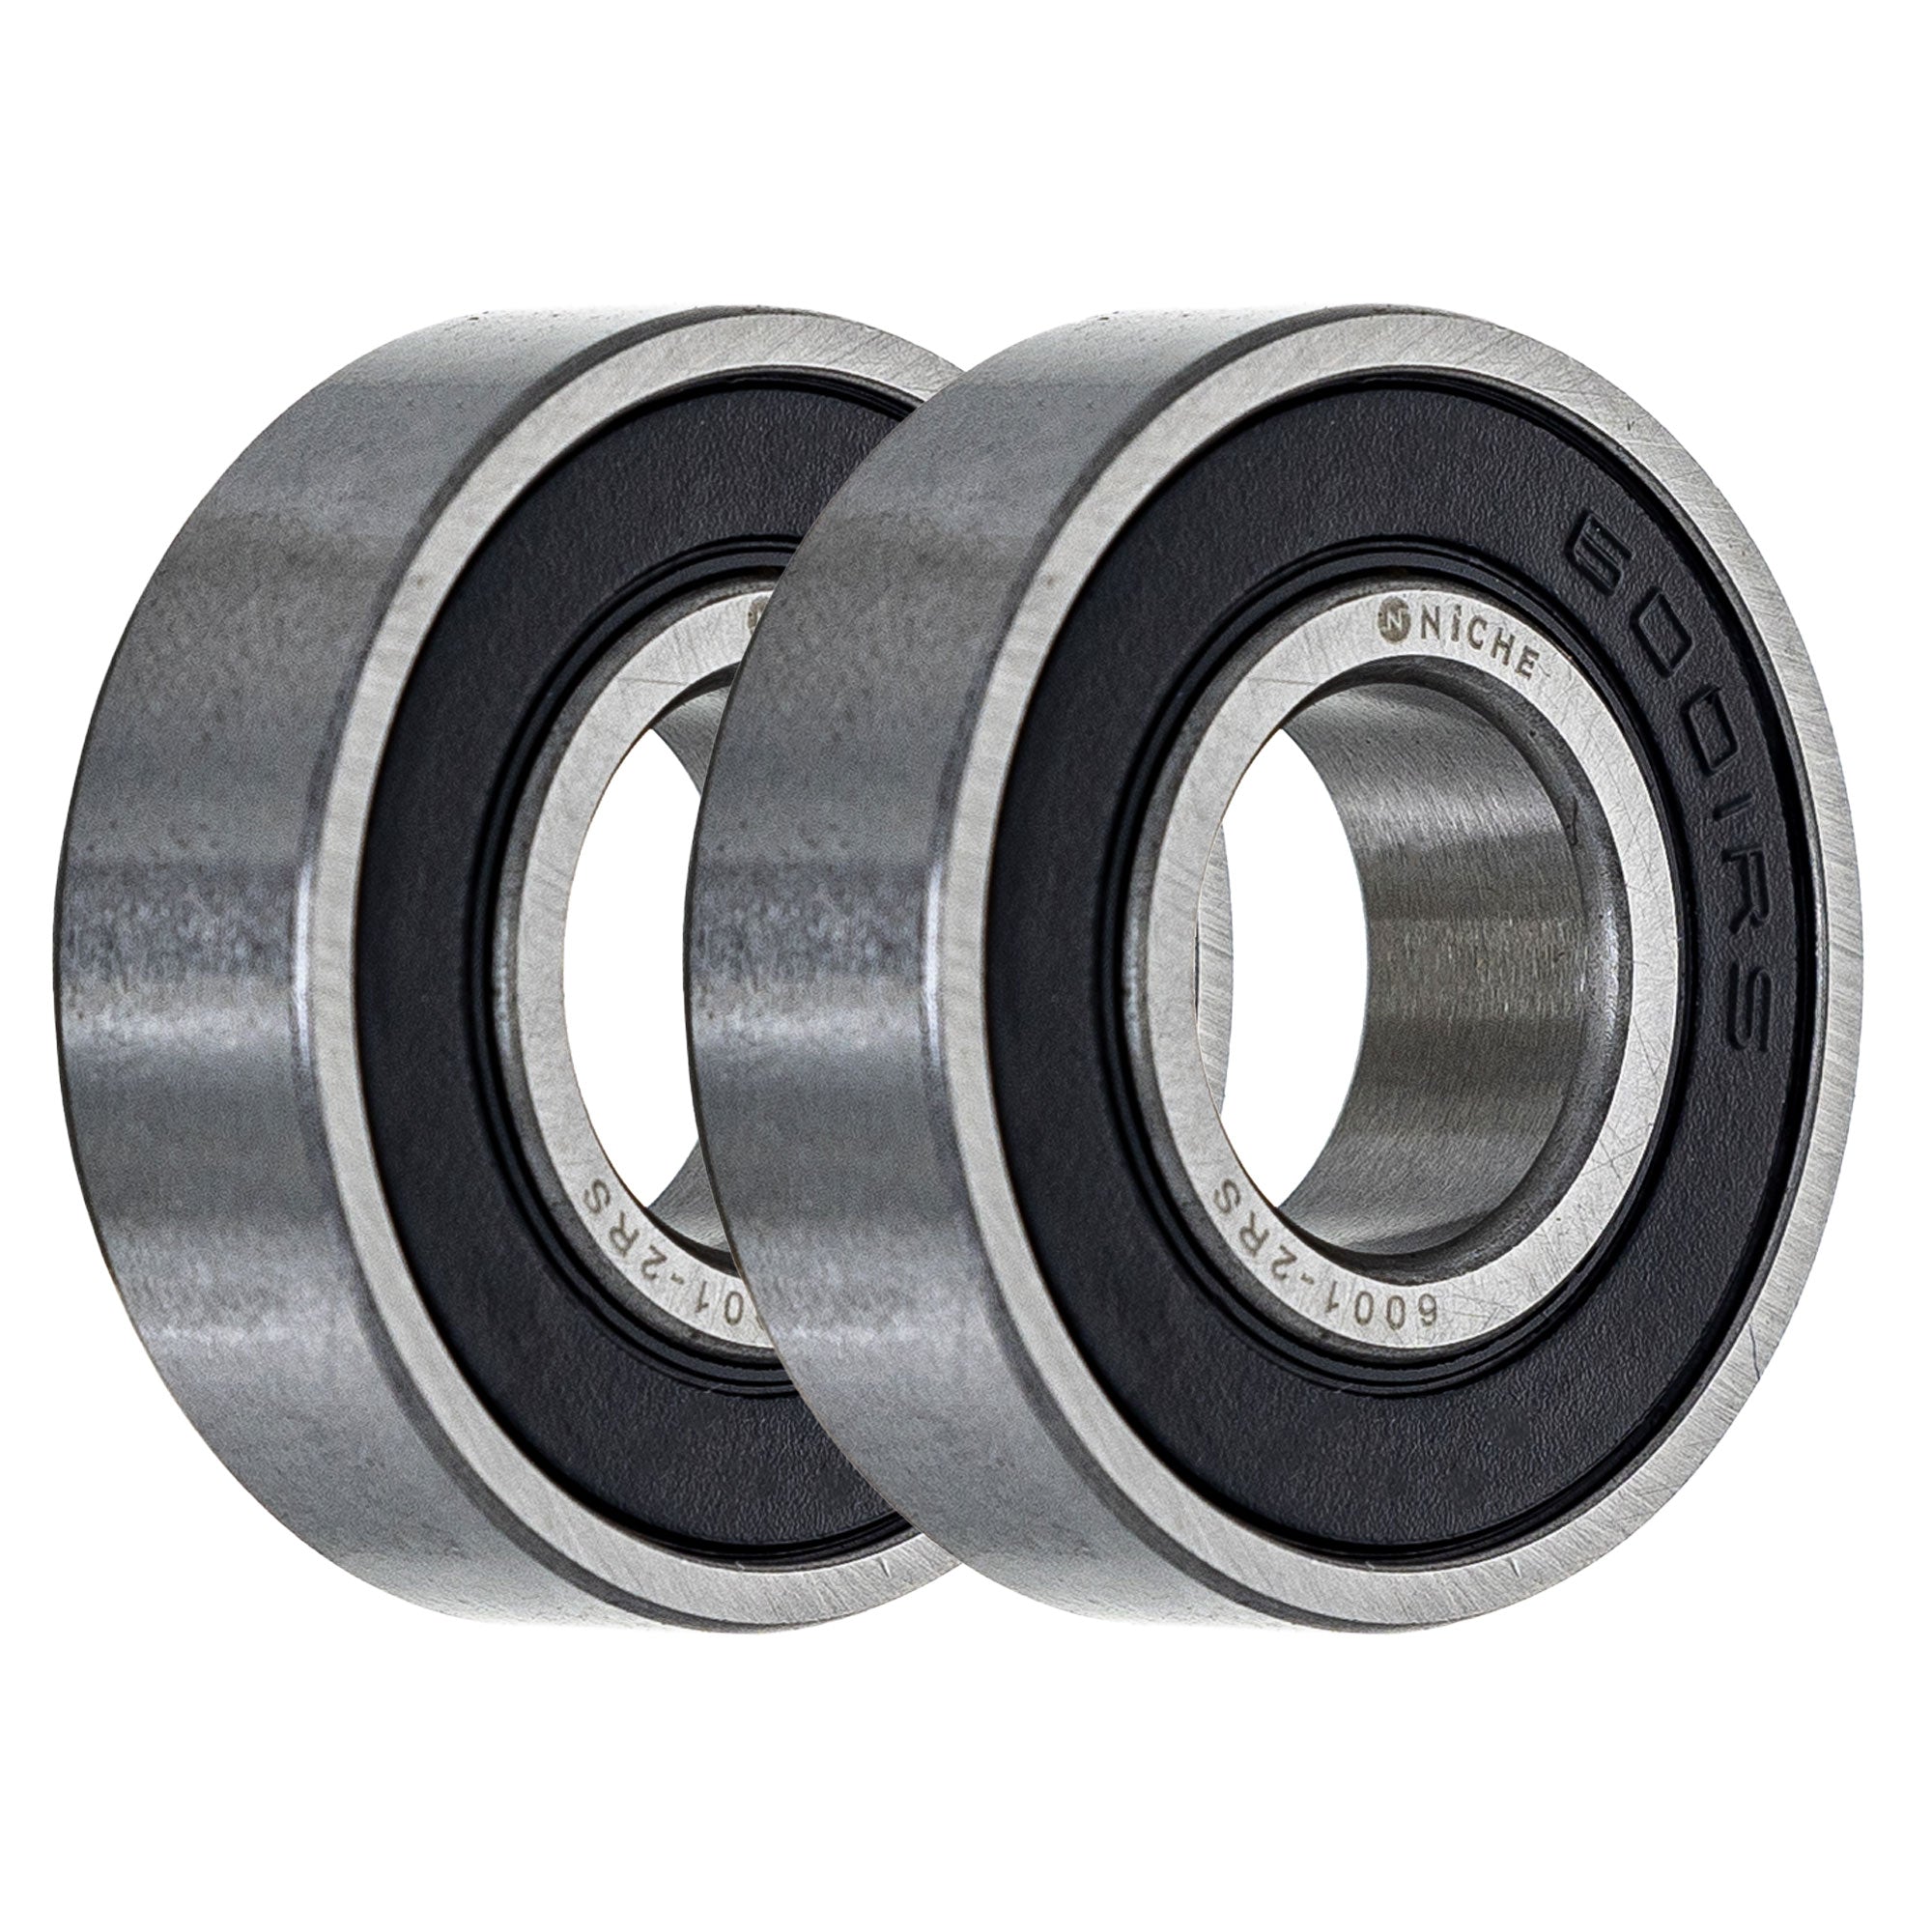 Single Row, Deep Groove, Ball Bearing Pack of 2 2-Pack for zOTHER YZ80 TTR125LE TTR125 NICHE 519-CBB2257R